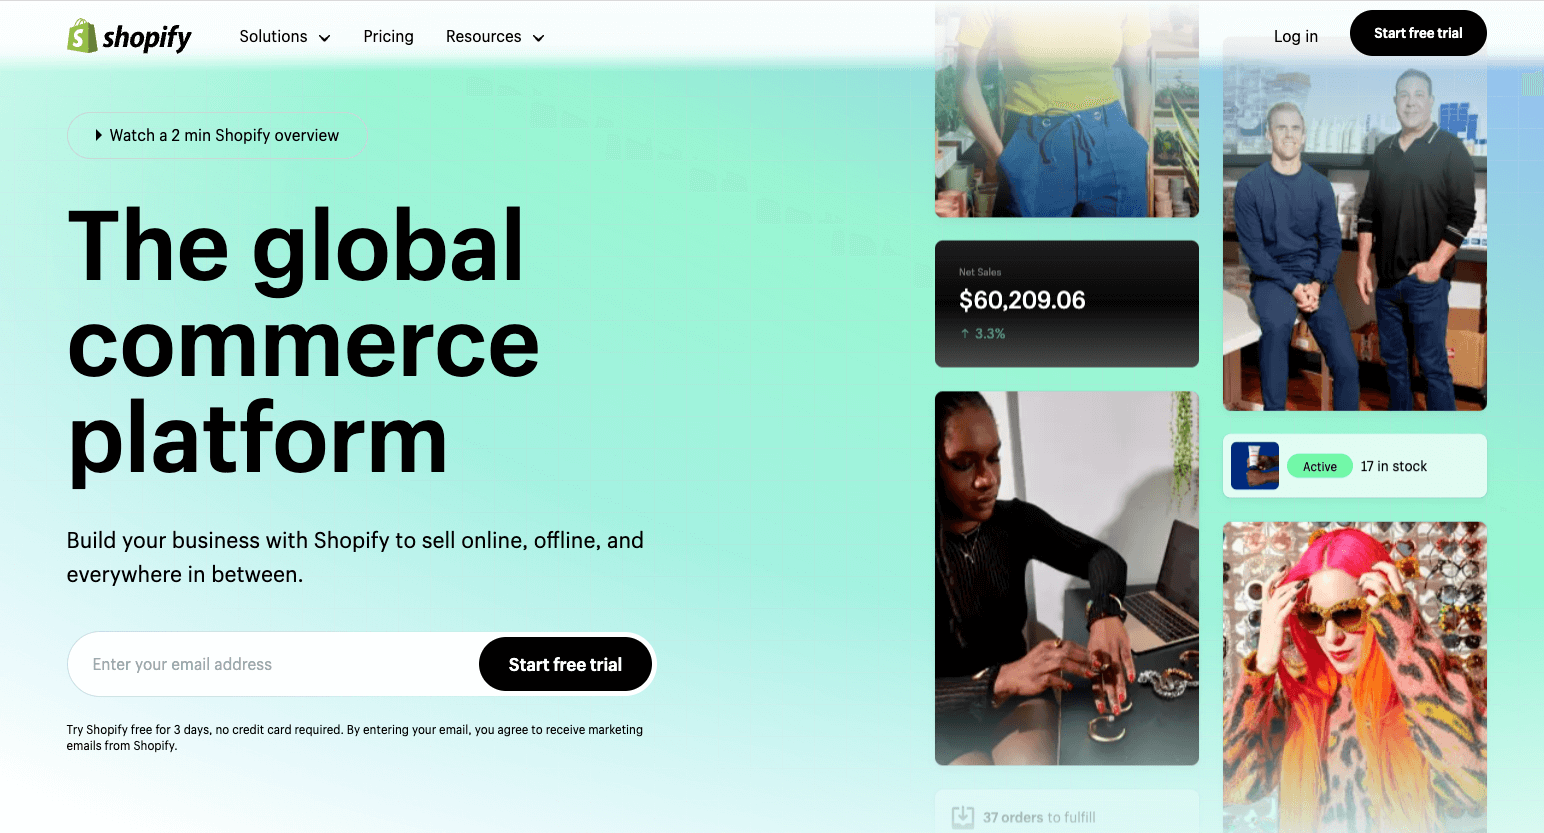 Image alt: Shopify is a world-renown ecommerce platform with a successful track record.